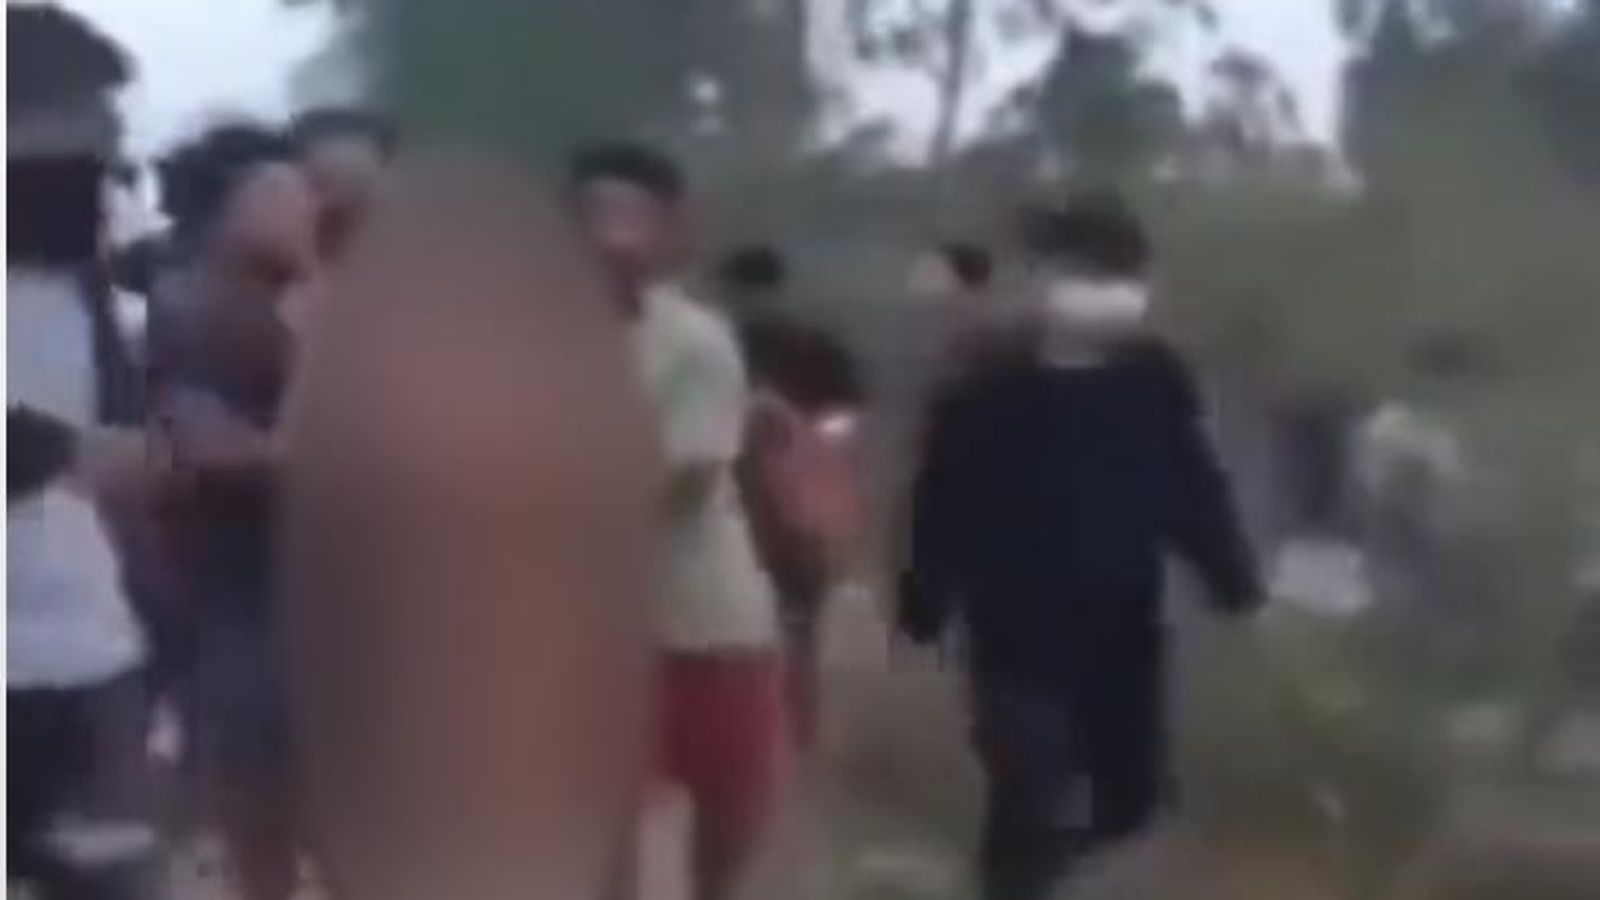 Indian Jungle Raping Sex Videos - Gang rape investigated as video shows abducted Indian women being paraded  naked in Manipur | World News | Sky News